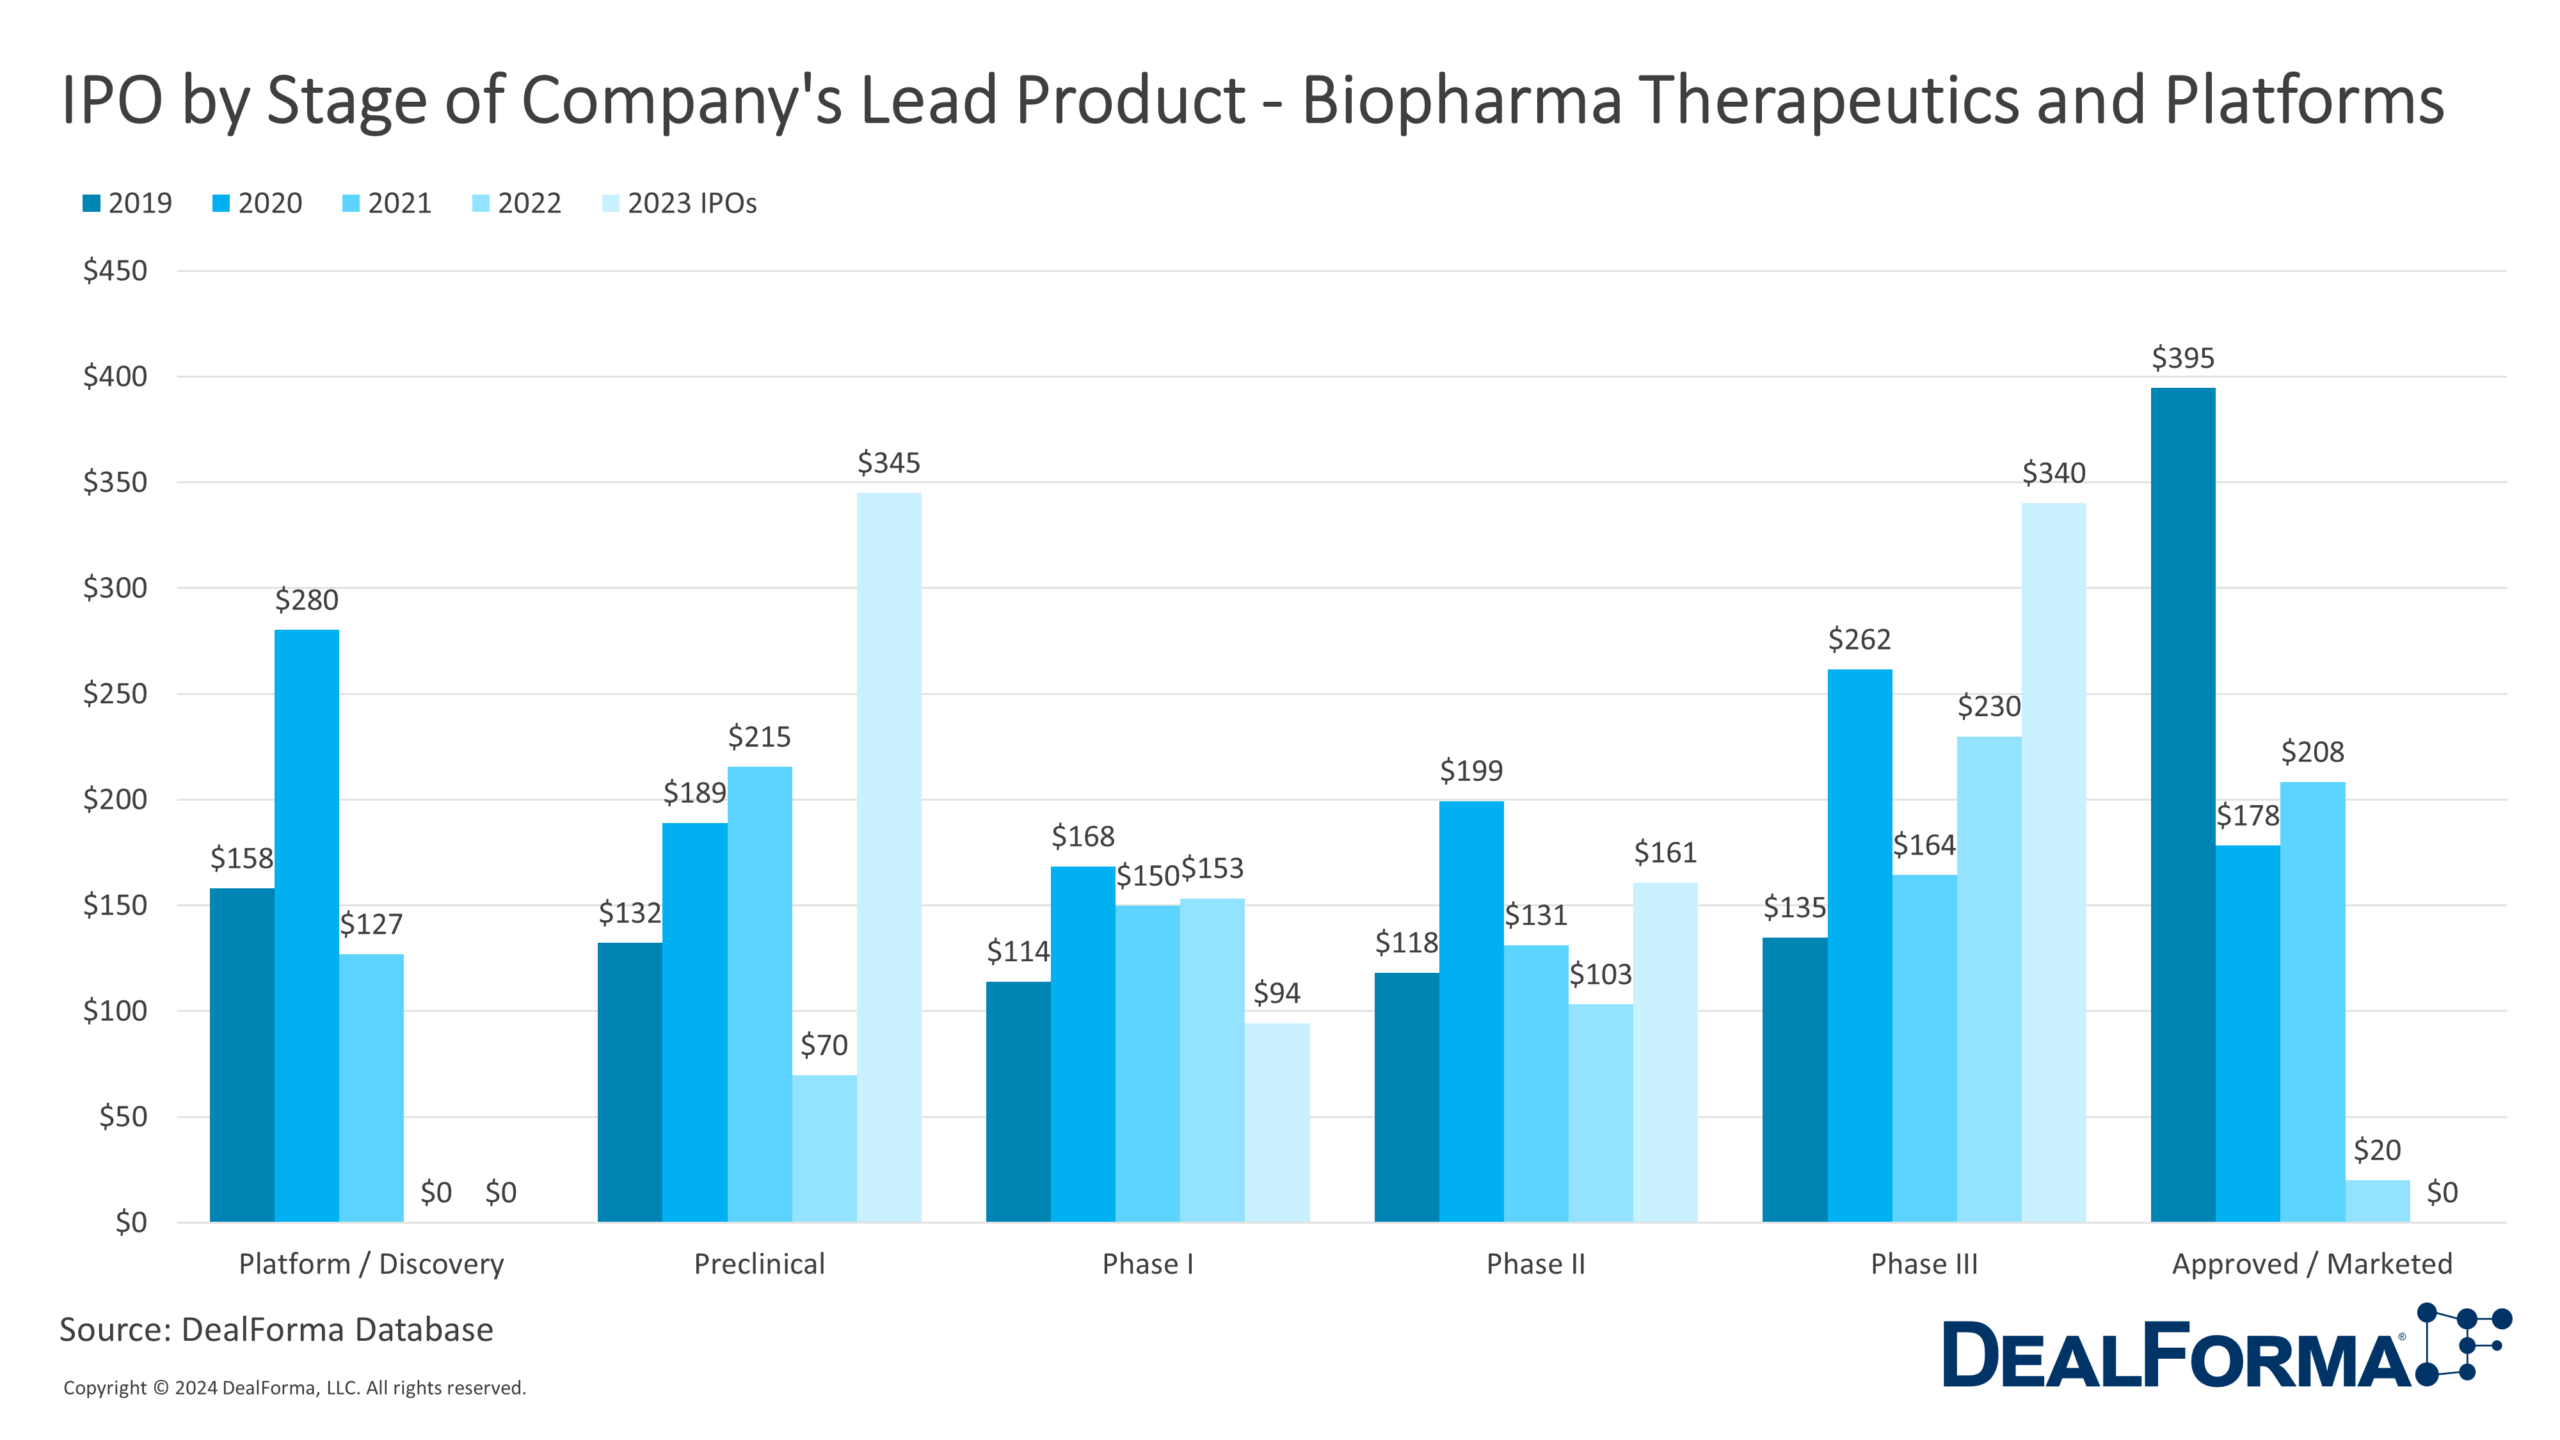 IPO by Stage of Company's Lead Product - Biopharma Therapeutics and Platforms